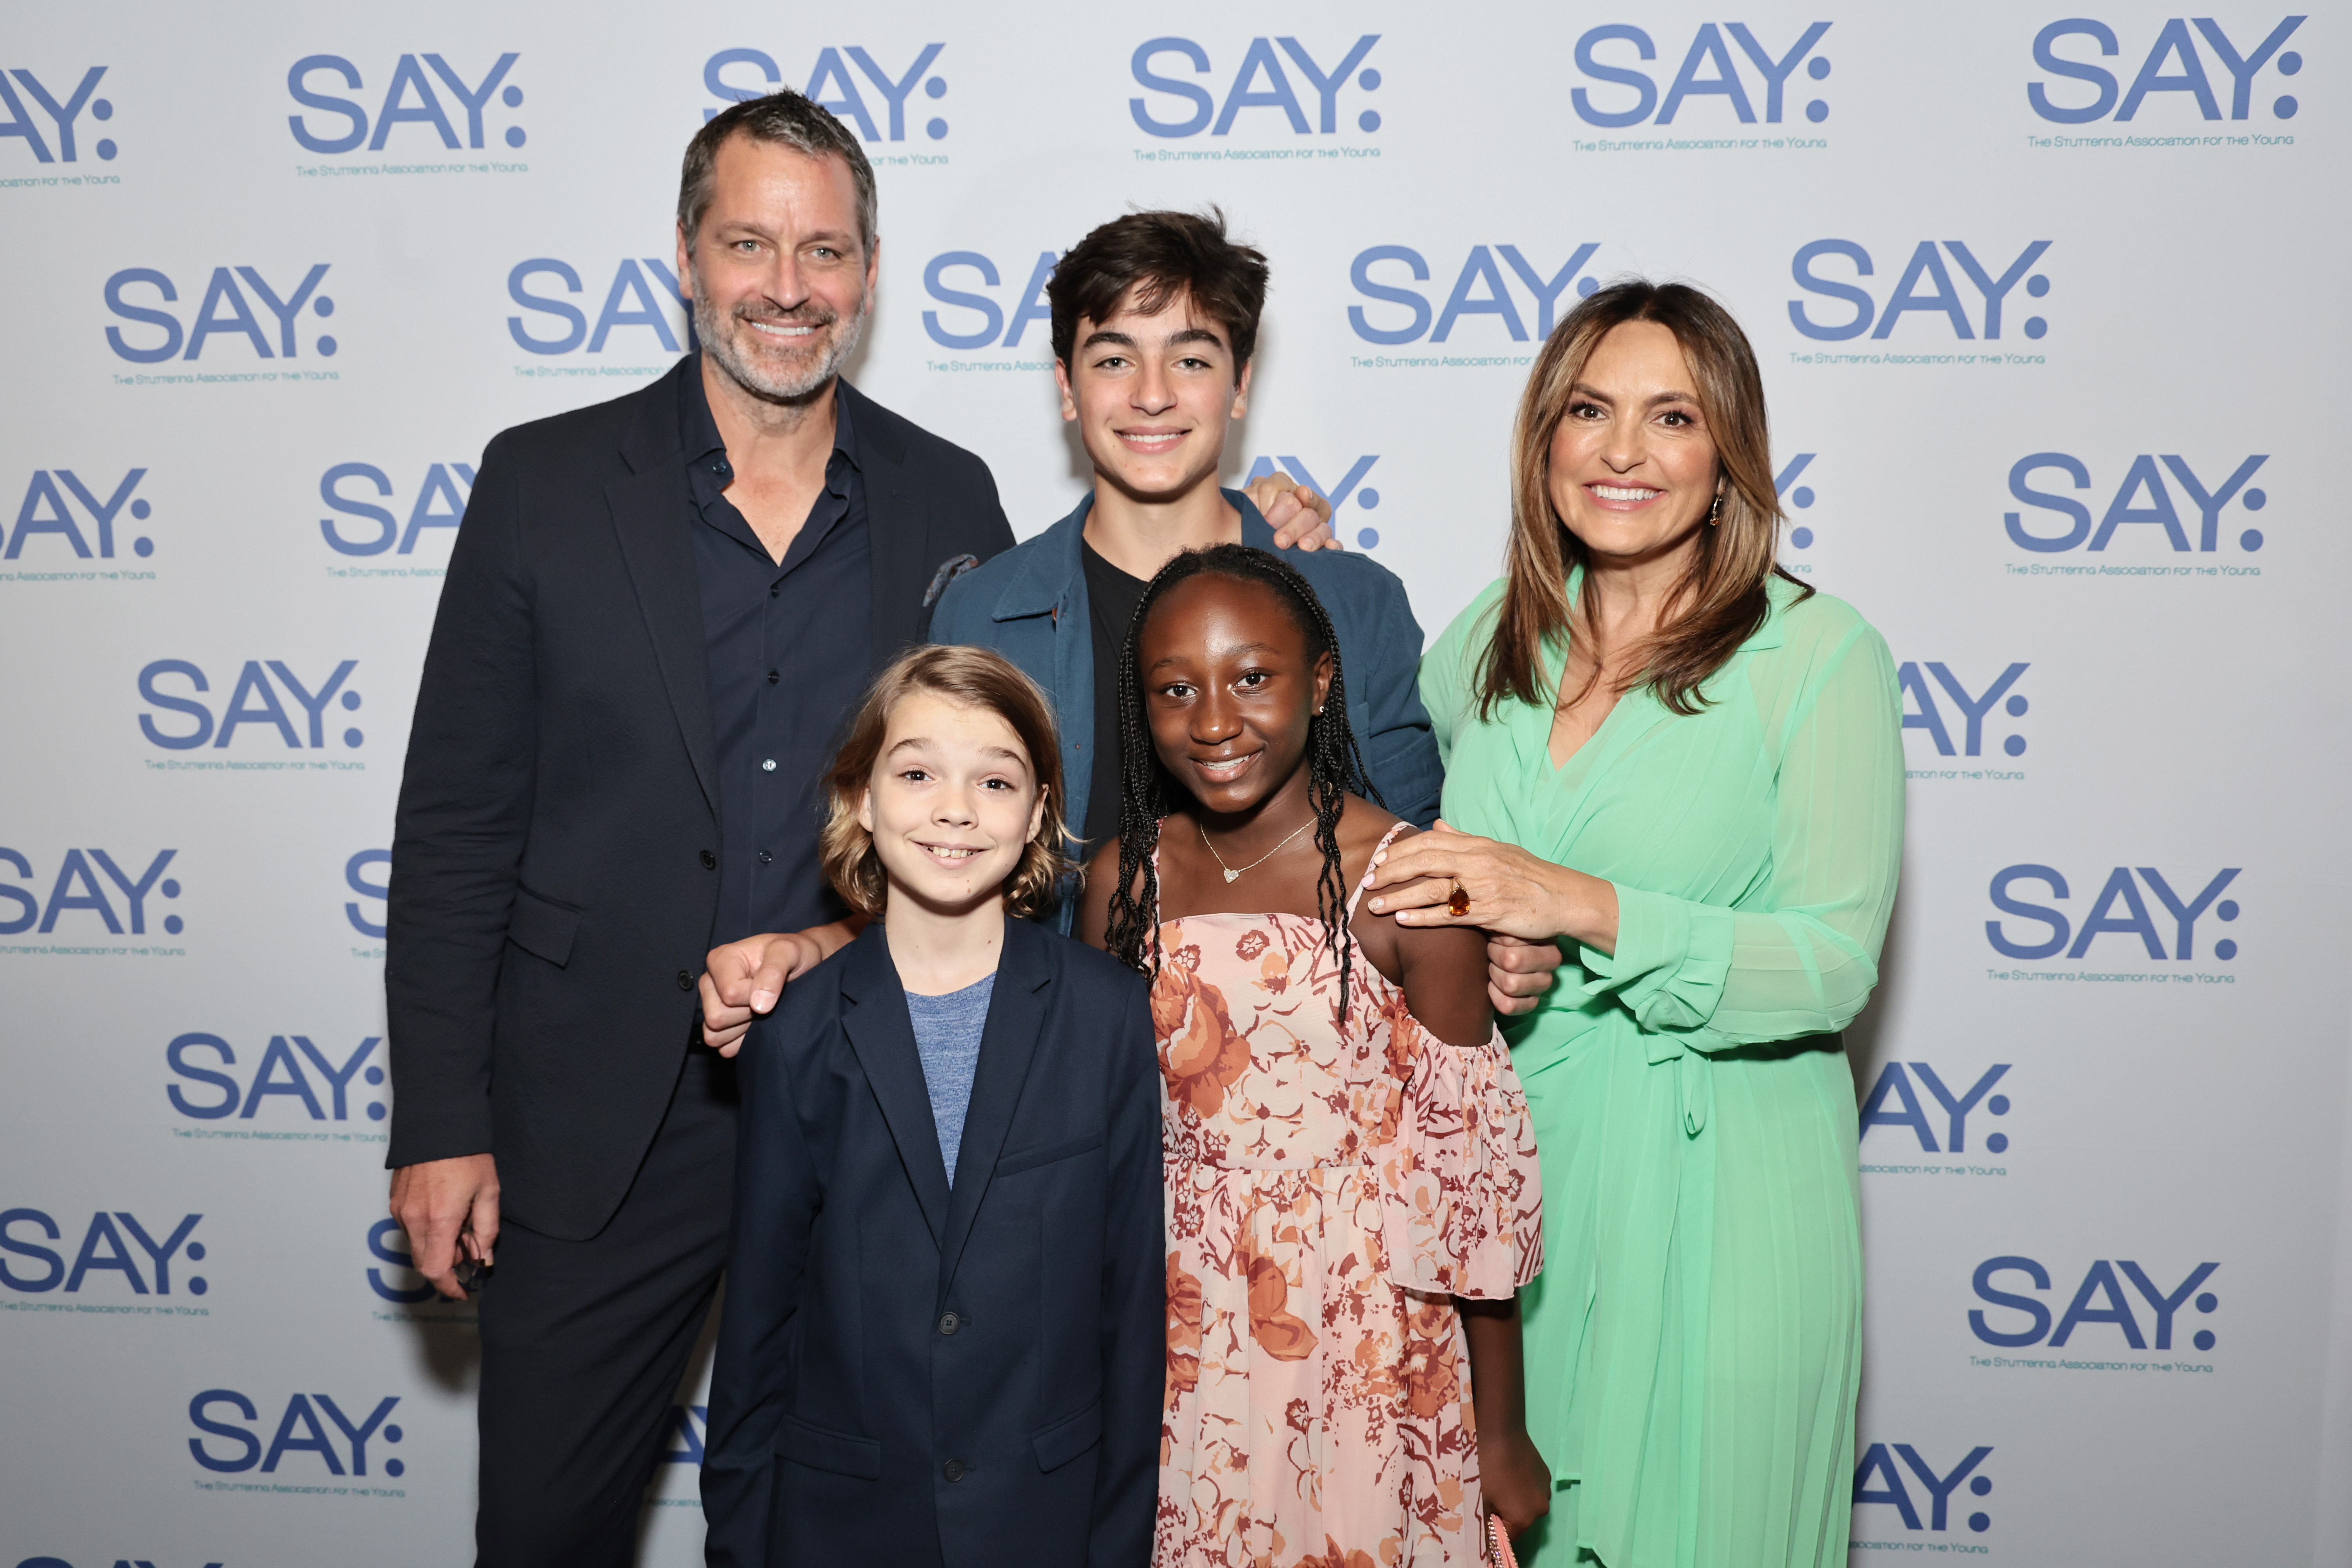 Peter Hermann and Mariska Hargitay with their children, August, Andrew, and Amaya at the Stuttering Association For The Young (SAY) Benefit Gala on May 22, 2023 in New York City | Source: Getty Images